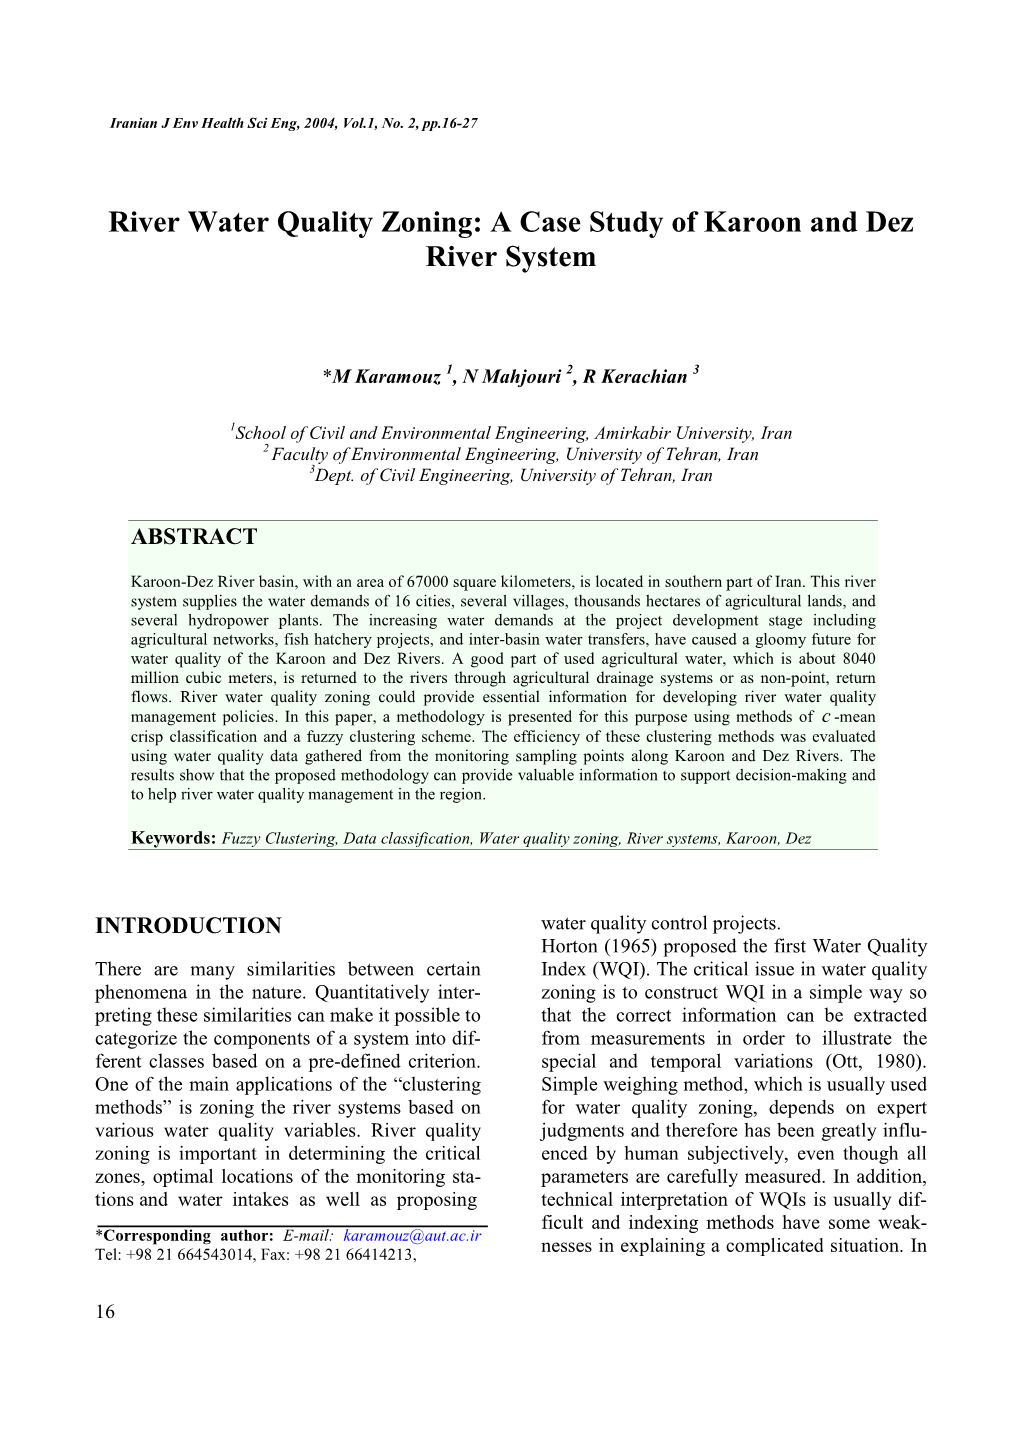 River Water Quality Zoning: a Case Study of Karoon and Dez River System